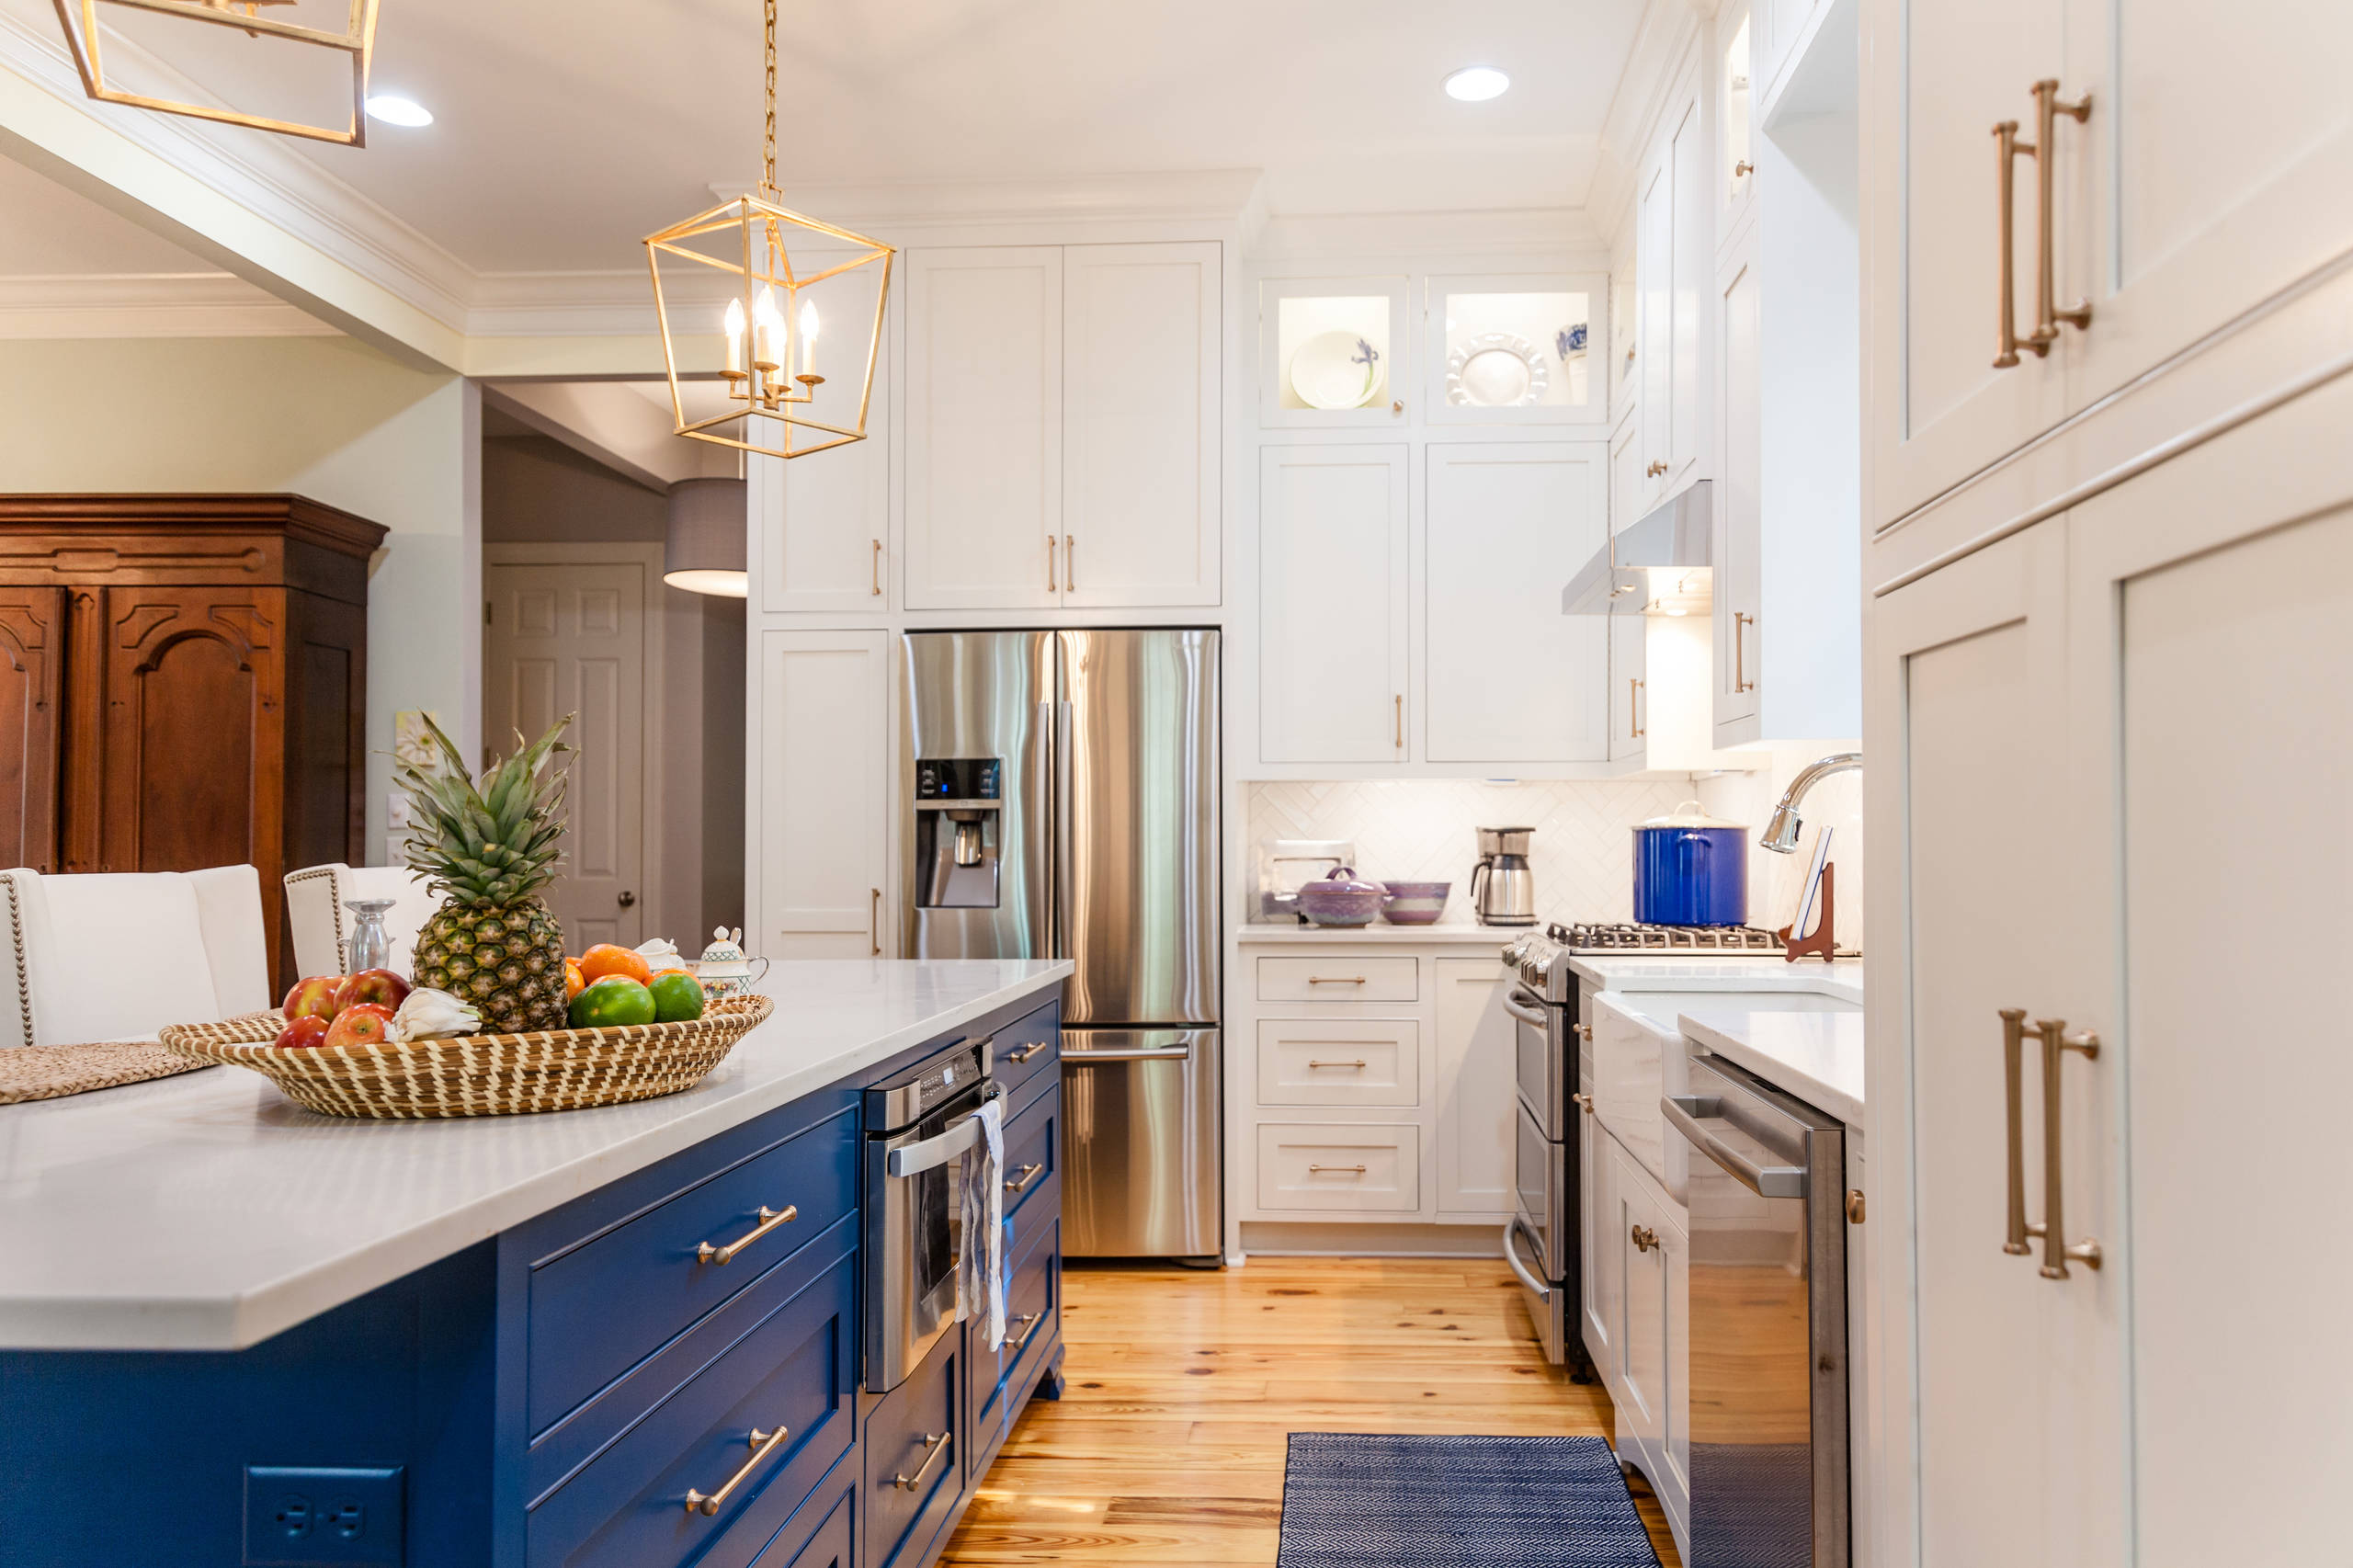 Nautical accents of brass and blue in a classic coastal kitchen